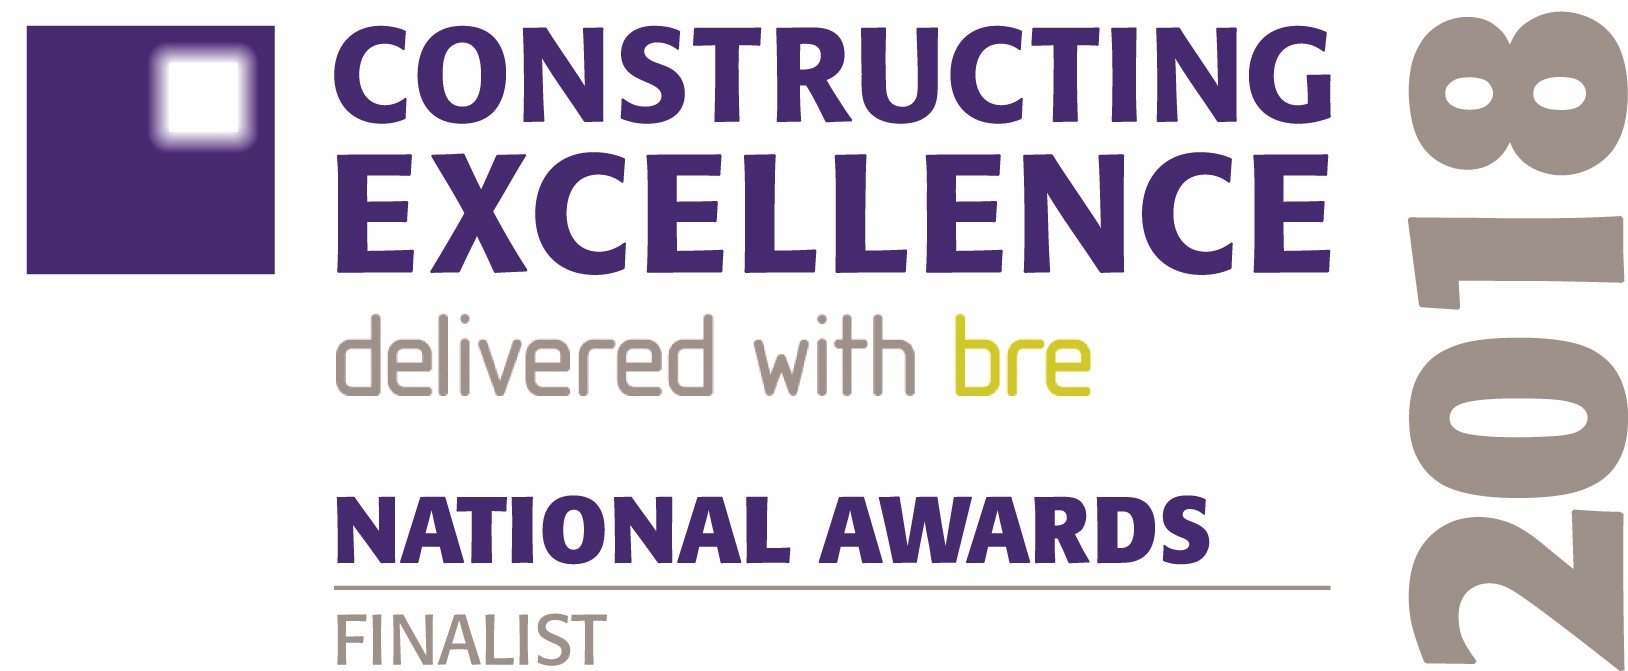 Constructing Excellence Awards - 2018